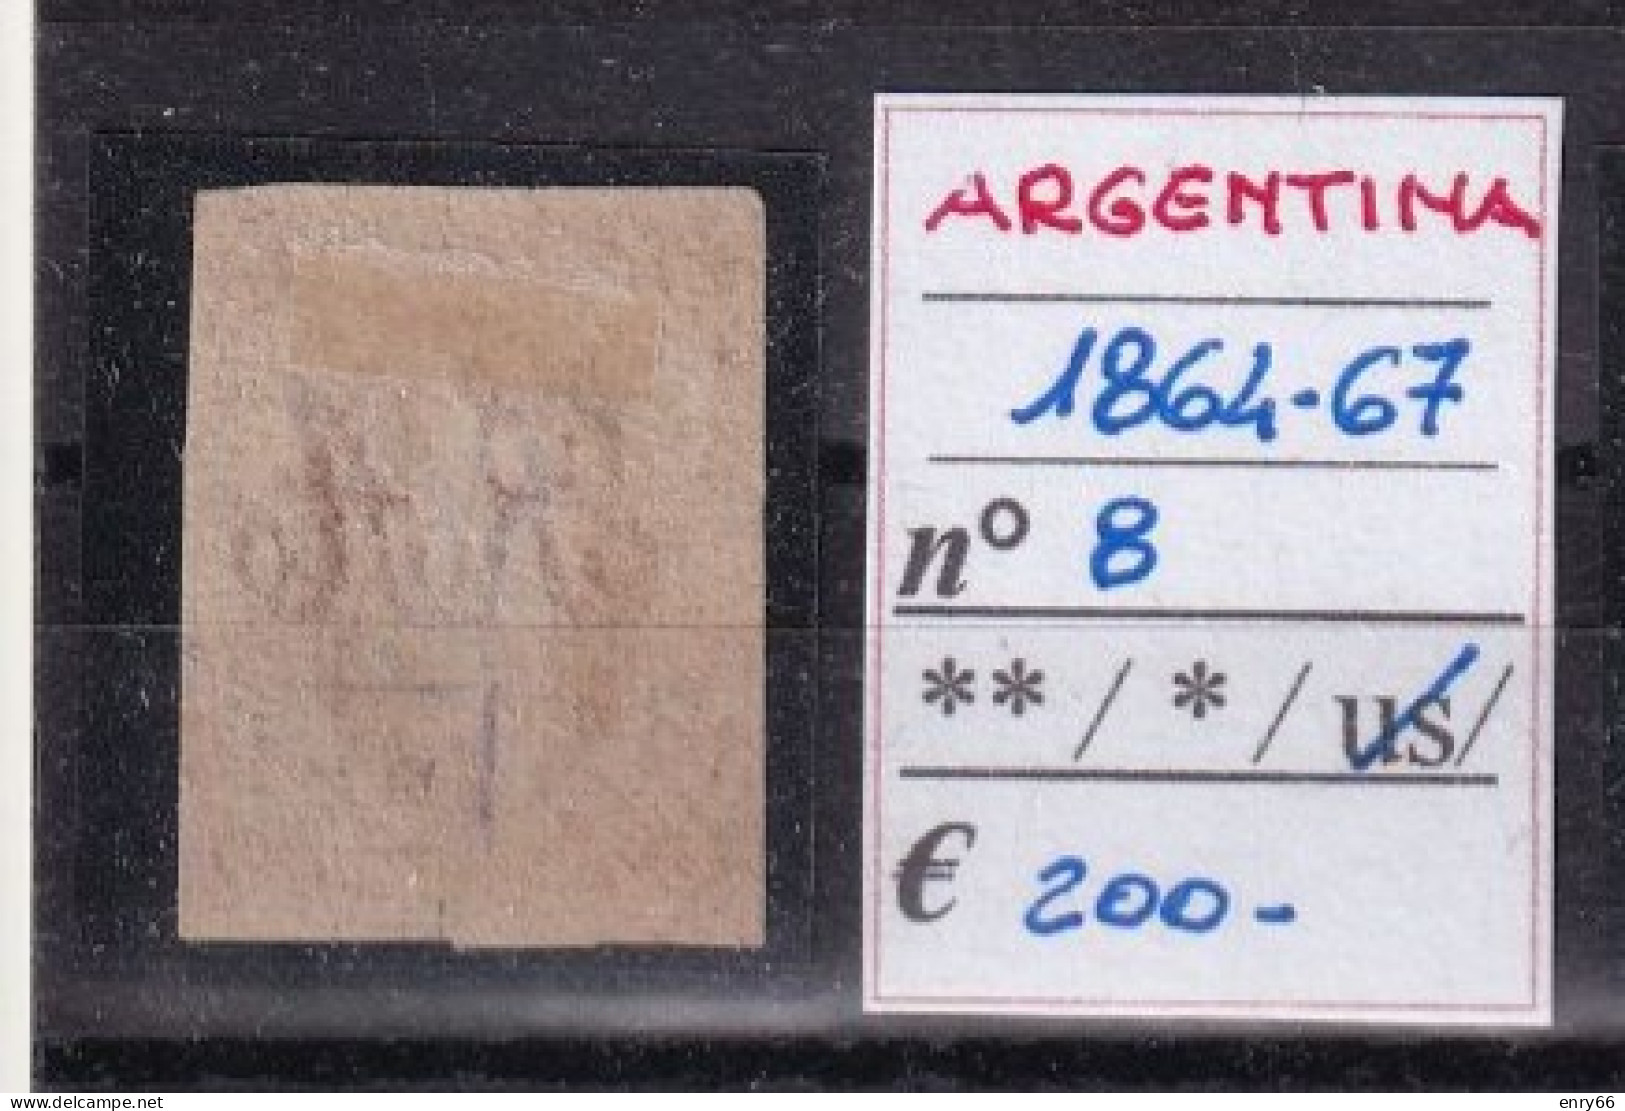 ARGENTINA 1864-67 N°8 USED - Used Stamps